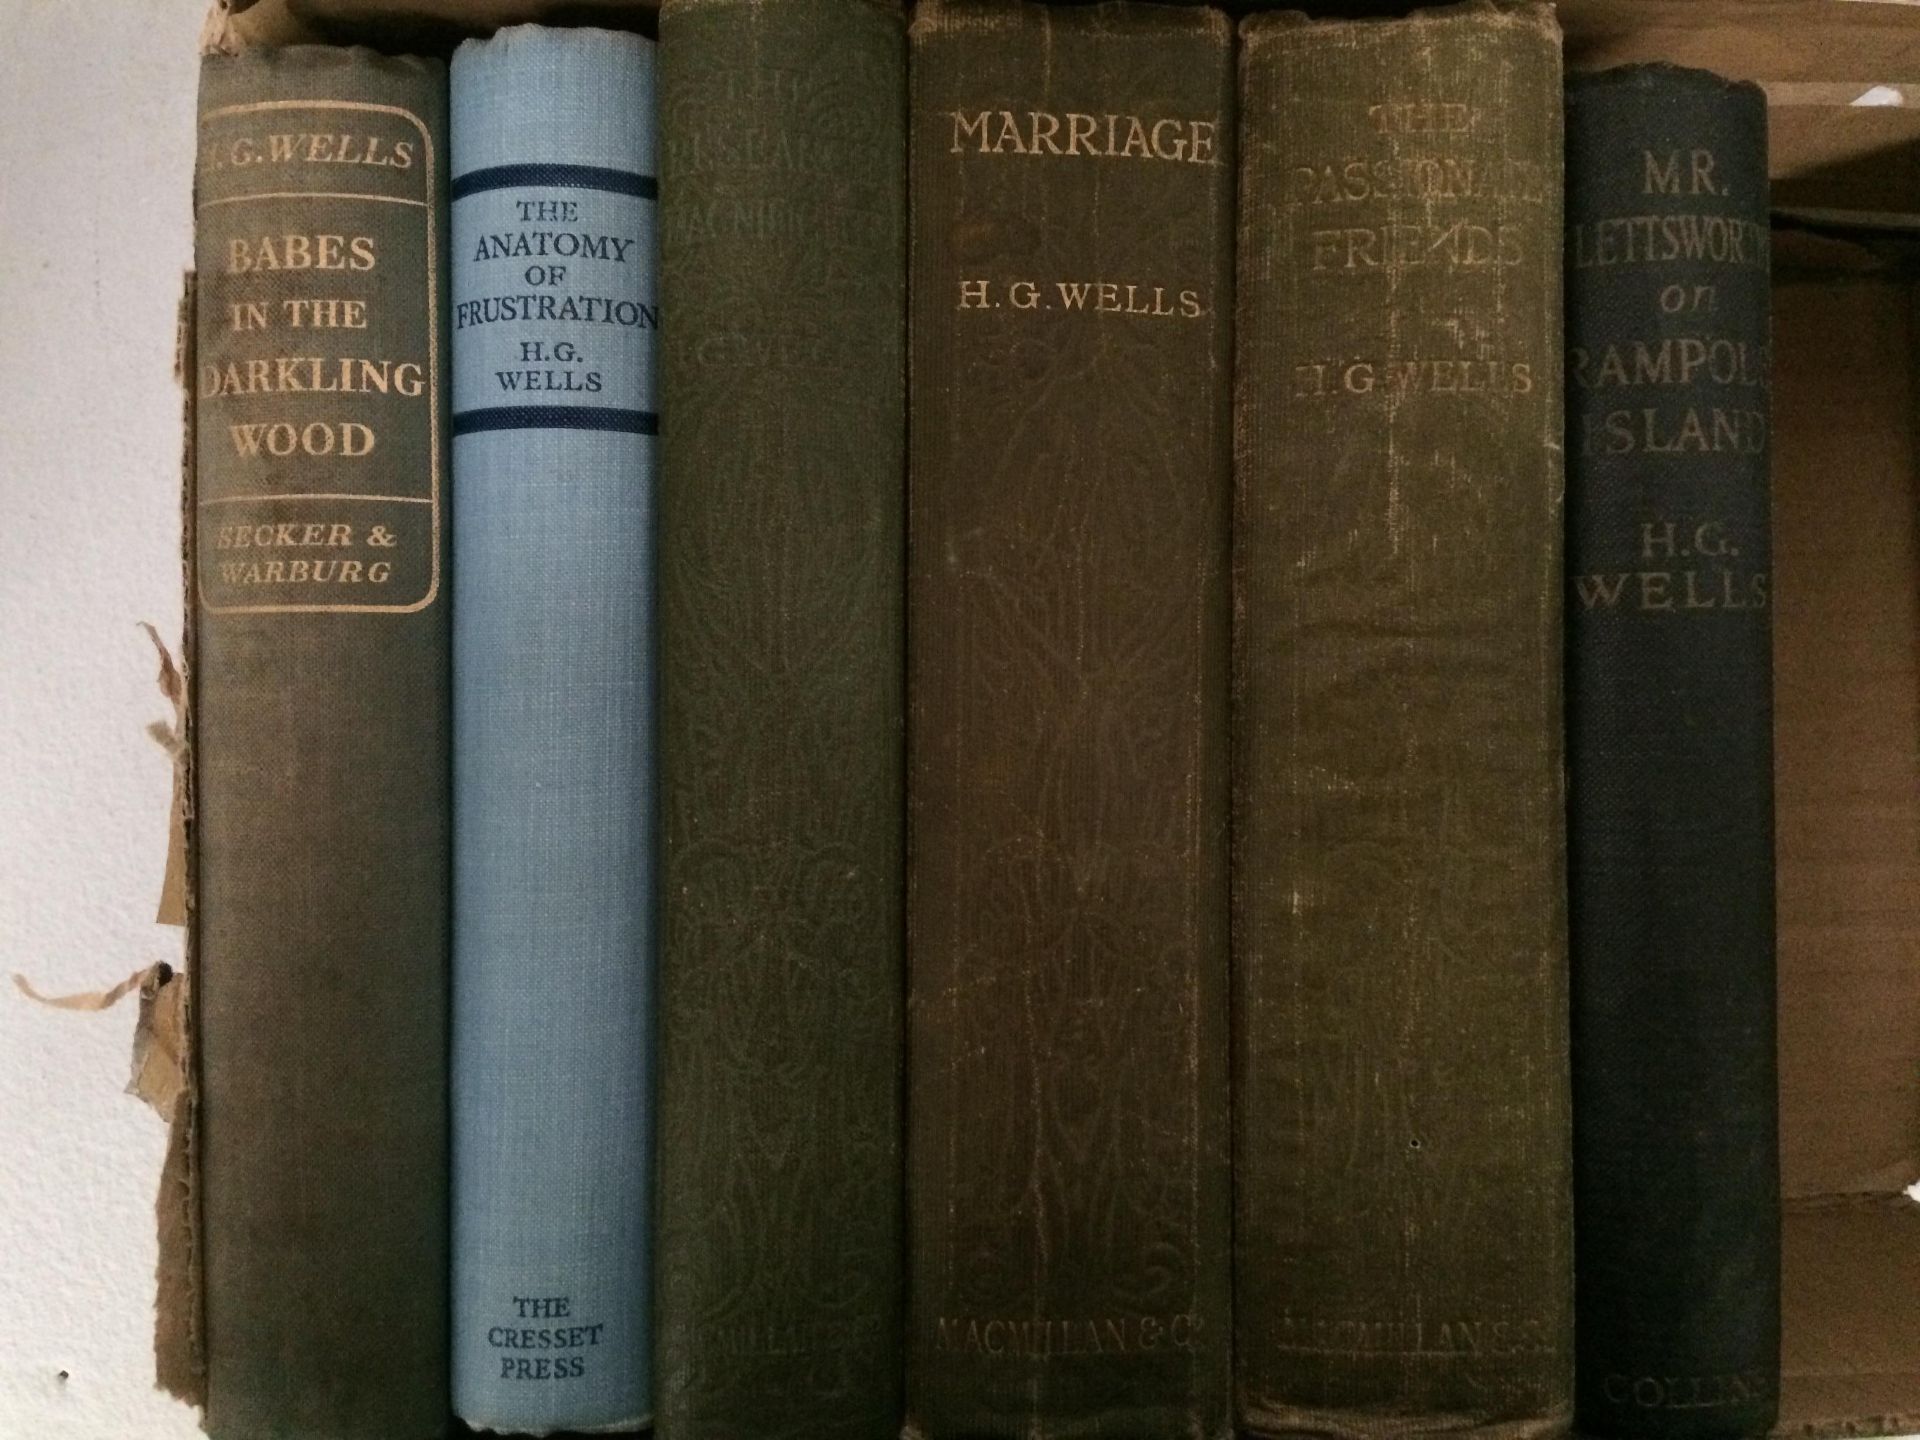 HG Wells 6 books - Marriage 1st Edition, 1912 published by Macmillan & Co London,